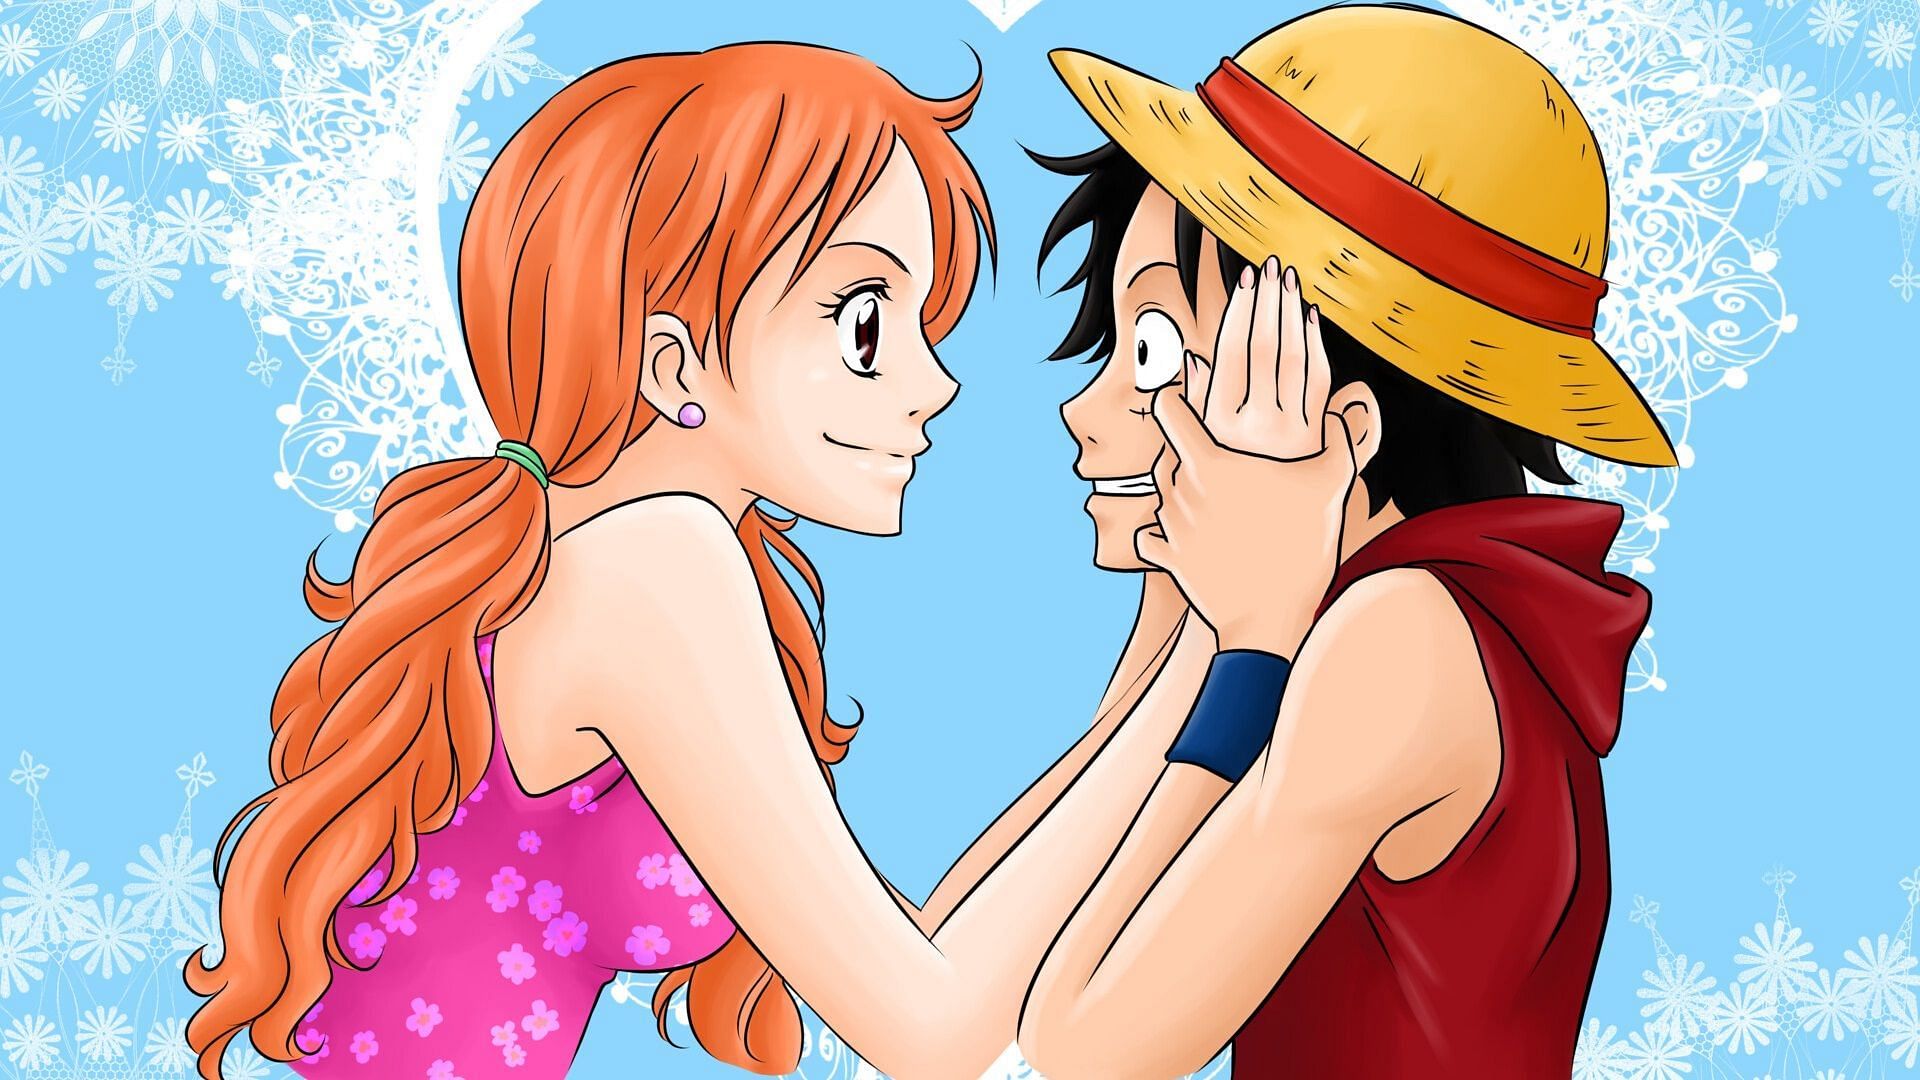 Just 1 of the reasons why i prefer/enjoy One Piece more : r